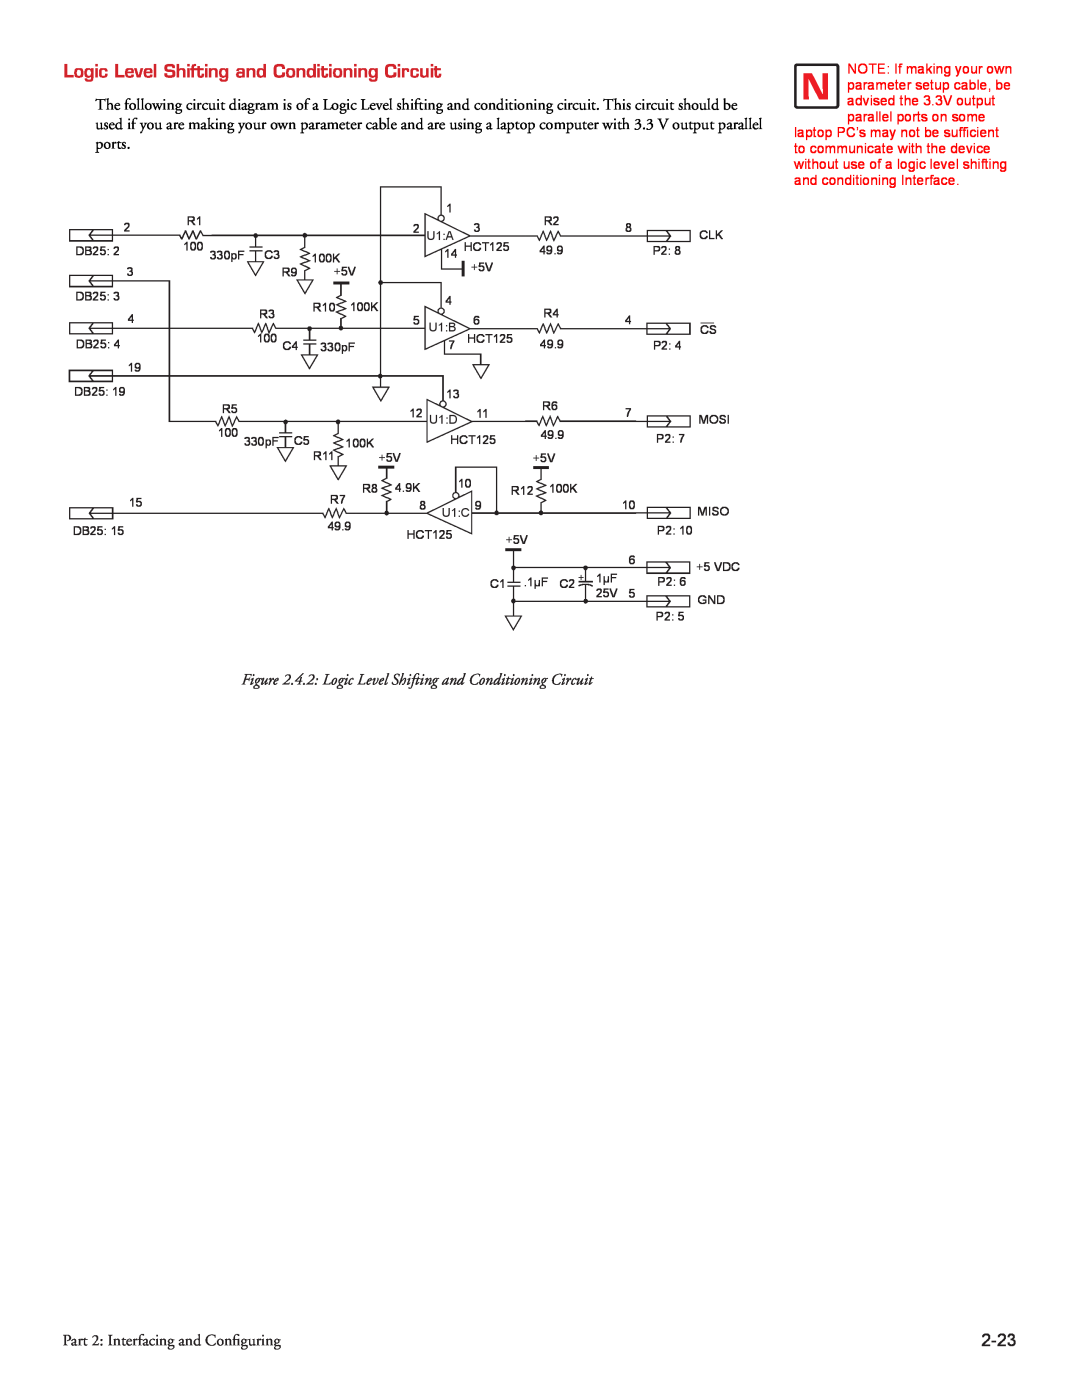 Intelligent Motion Systems MDrive34Plus Logic Level Shifting and Conditioning Circuit, Part 2 Interfacing and Configuring 